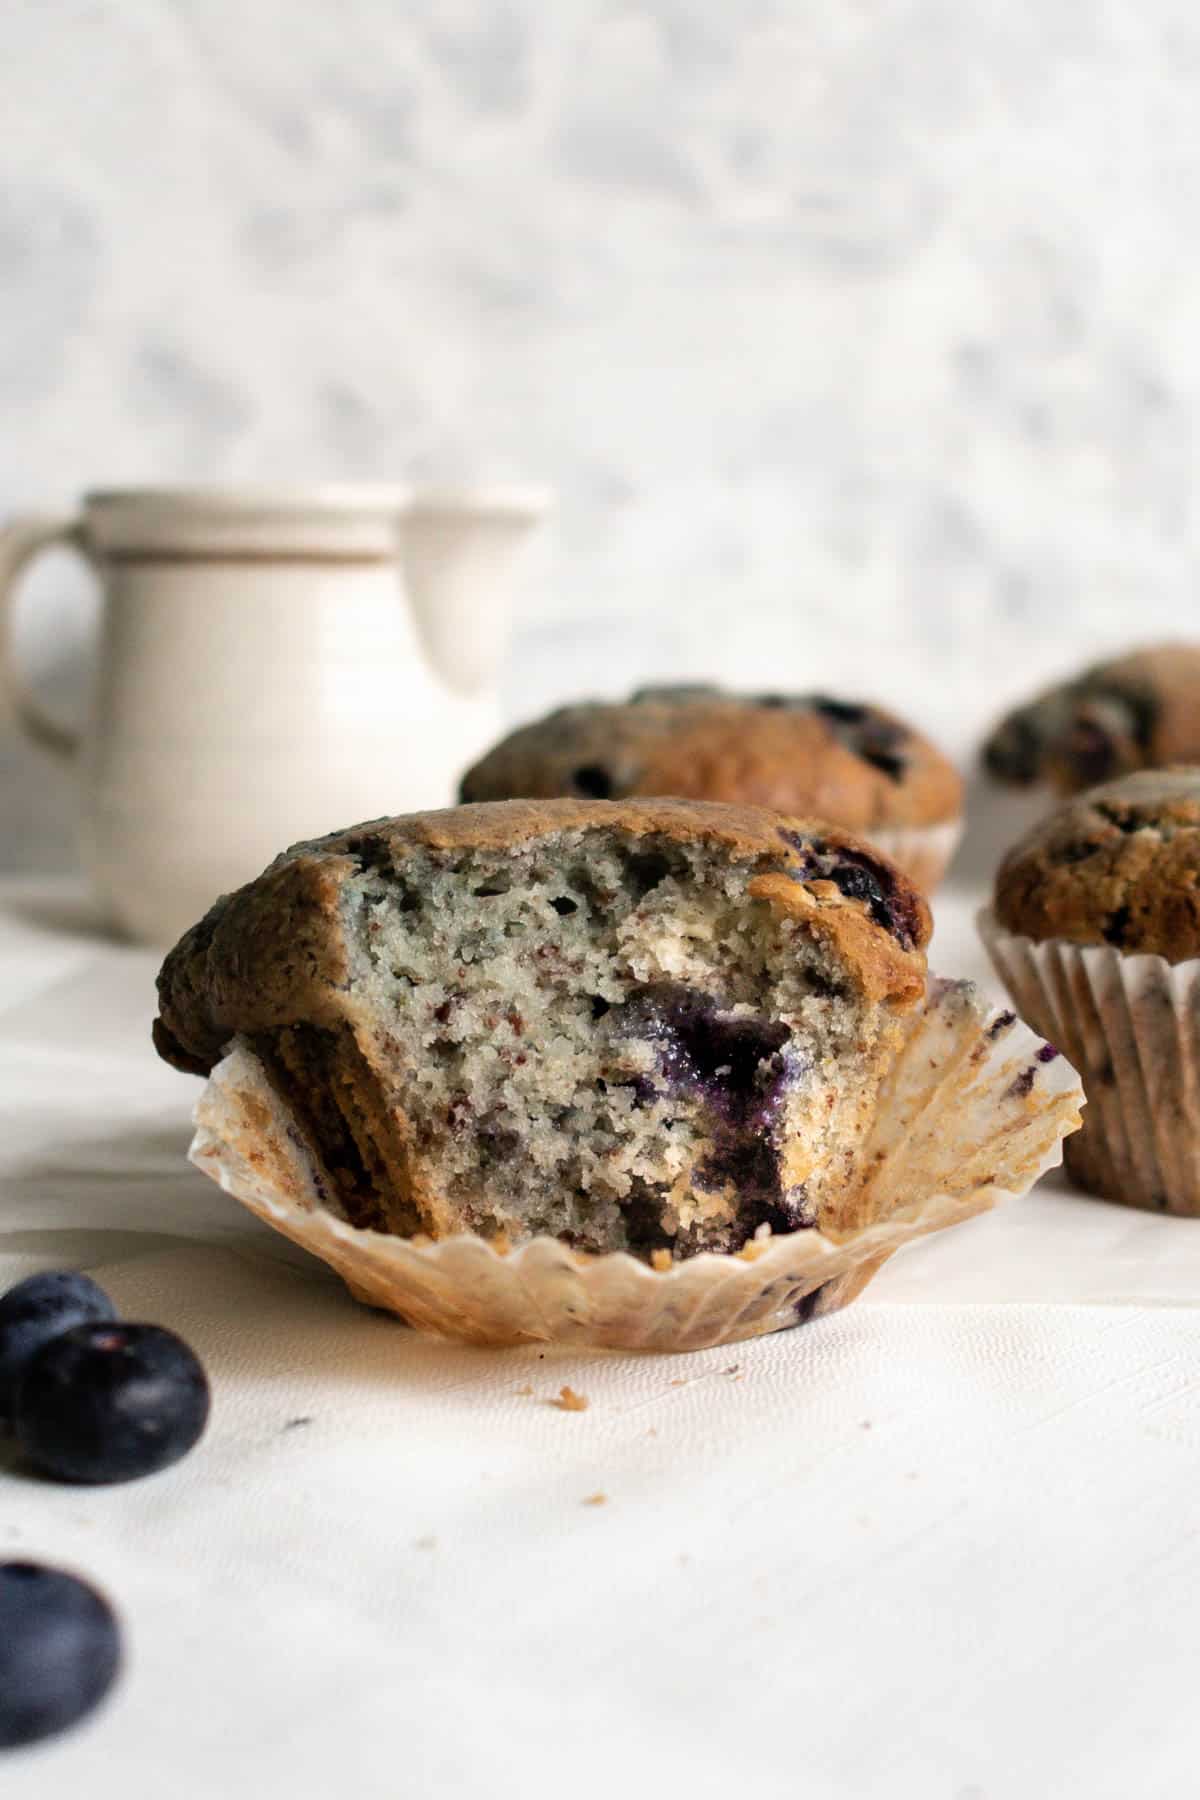 a blueberry muffin with a bite taken from it